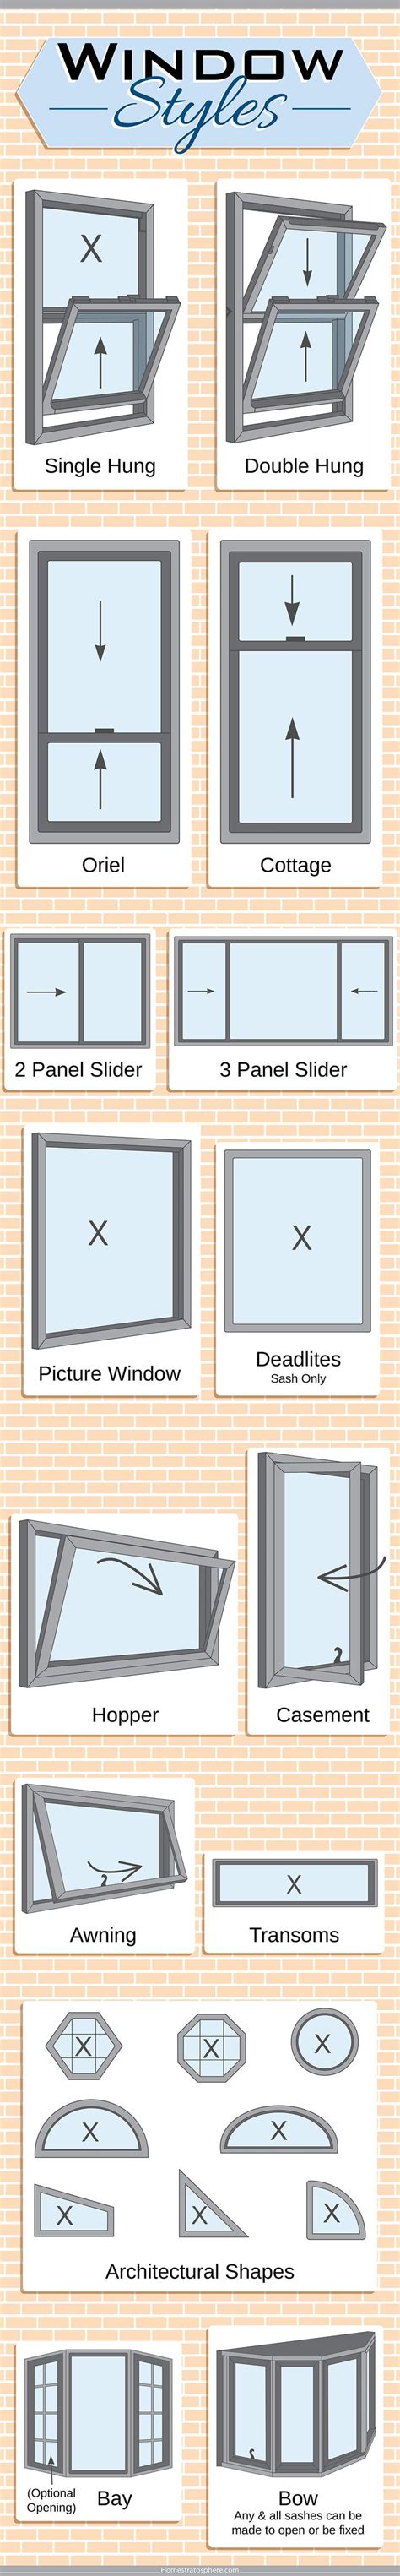 27 Different Types Of Windows For Your Home Featuring Descriptive